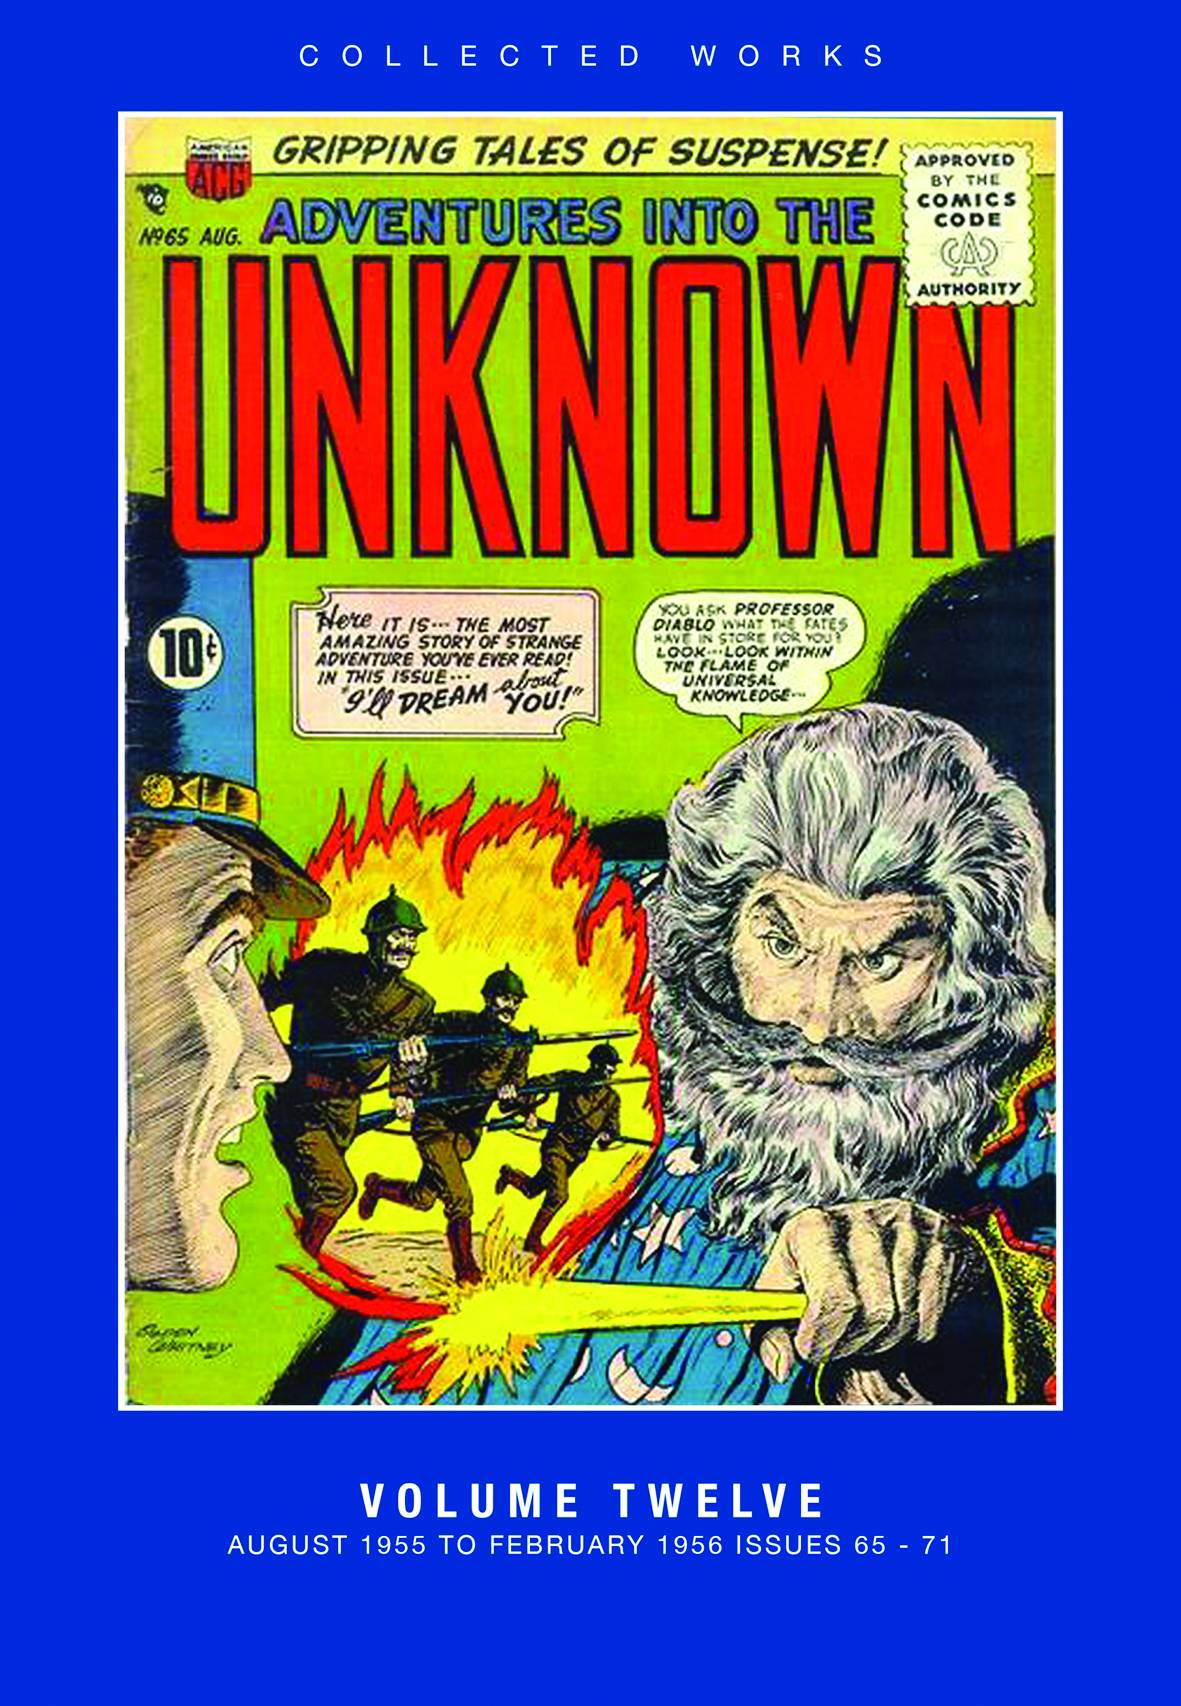 ACG Collected Works Adventure Into Unknown Hardcover Volume 12